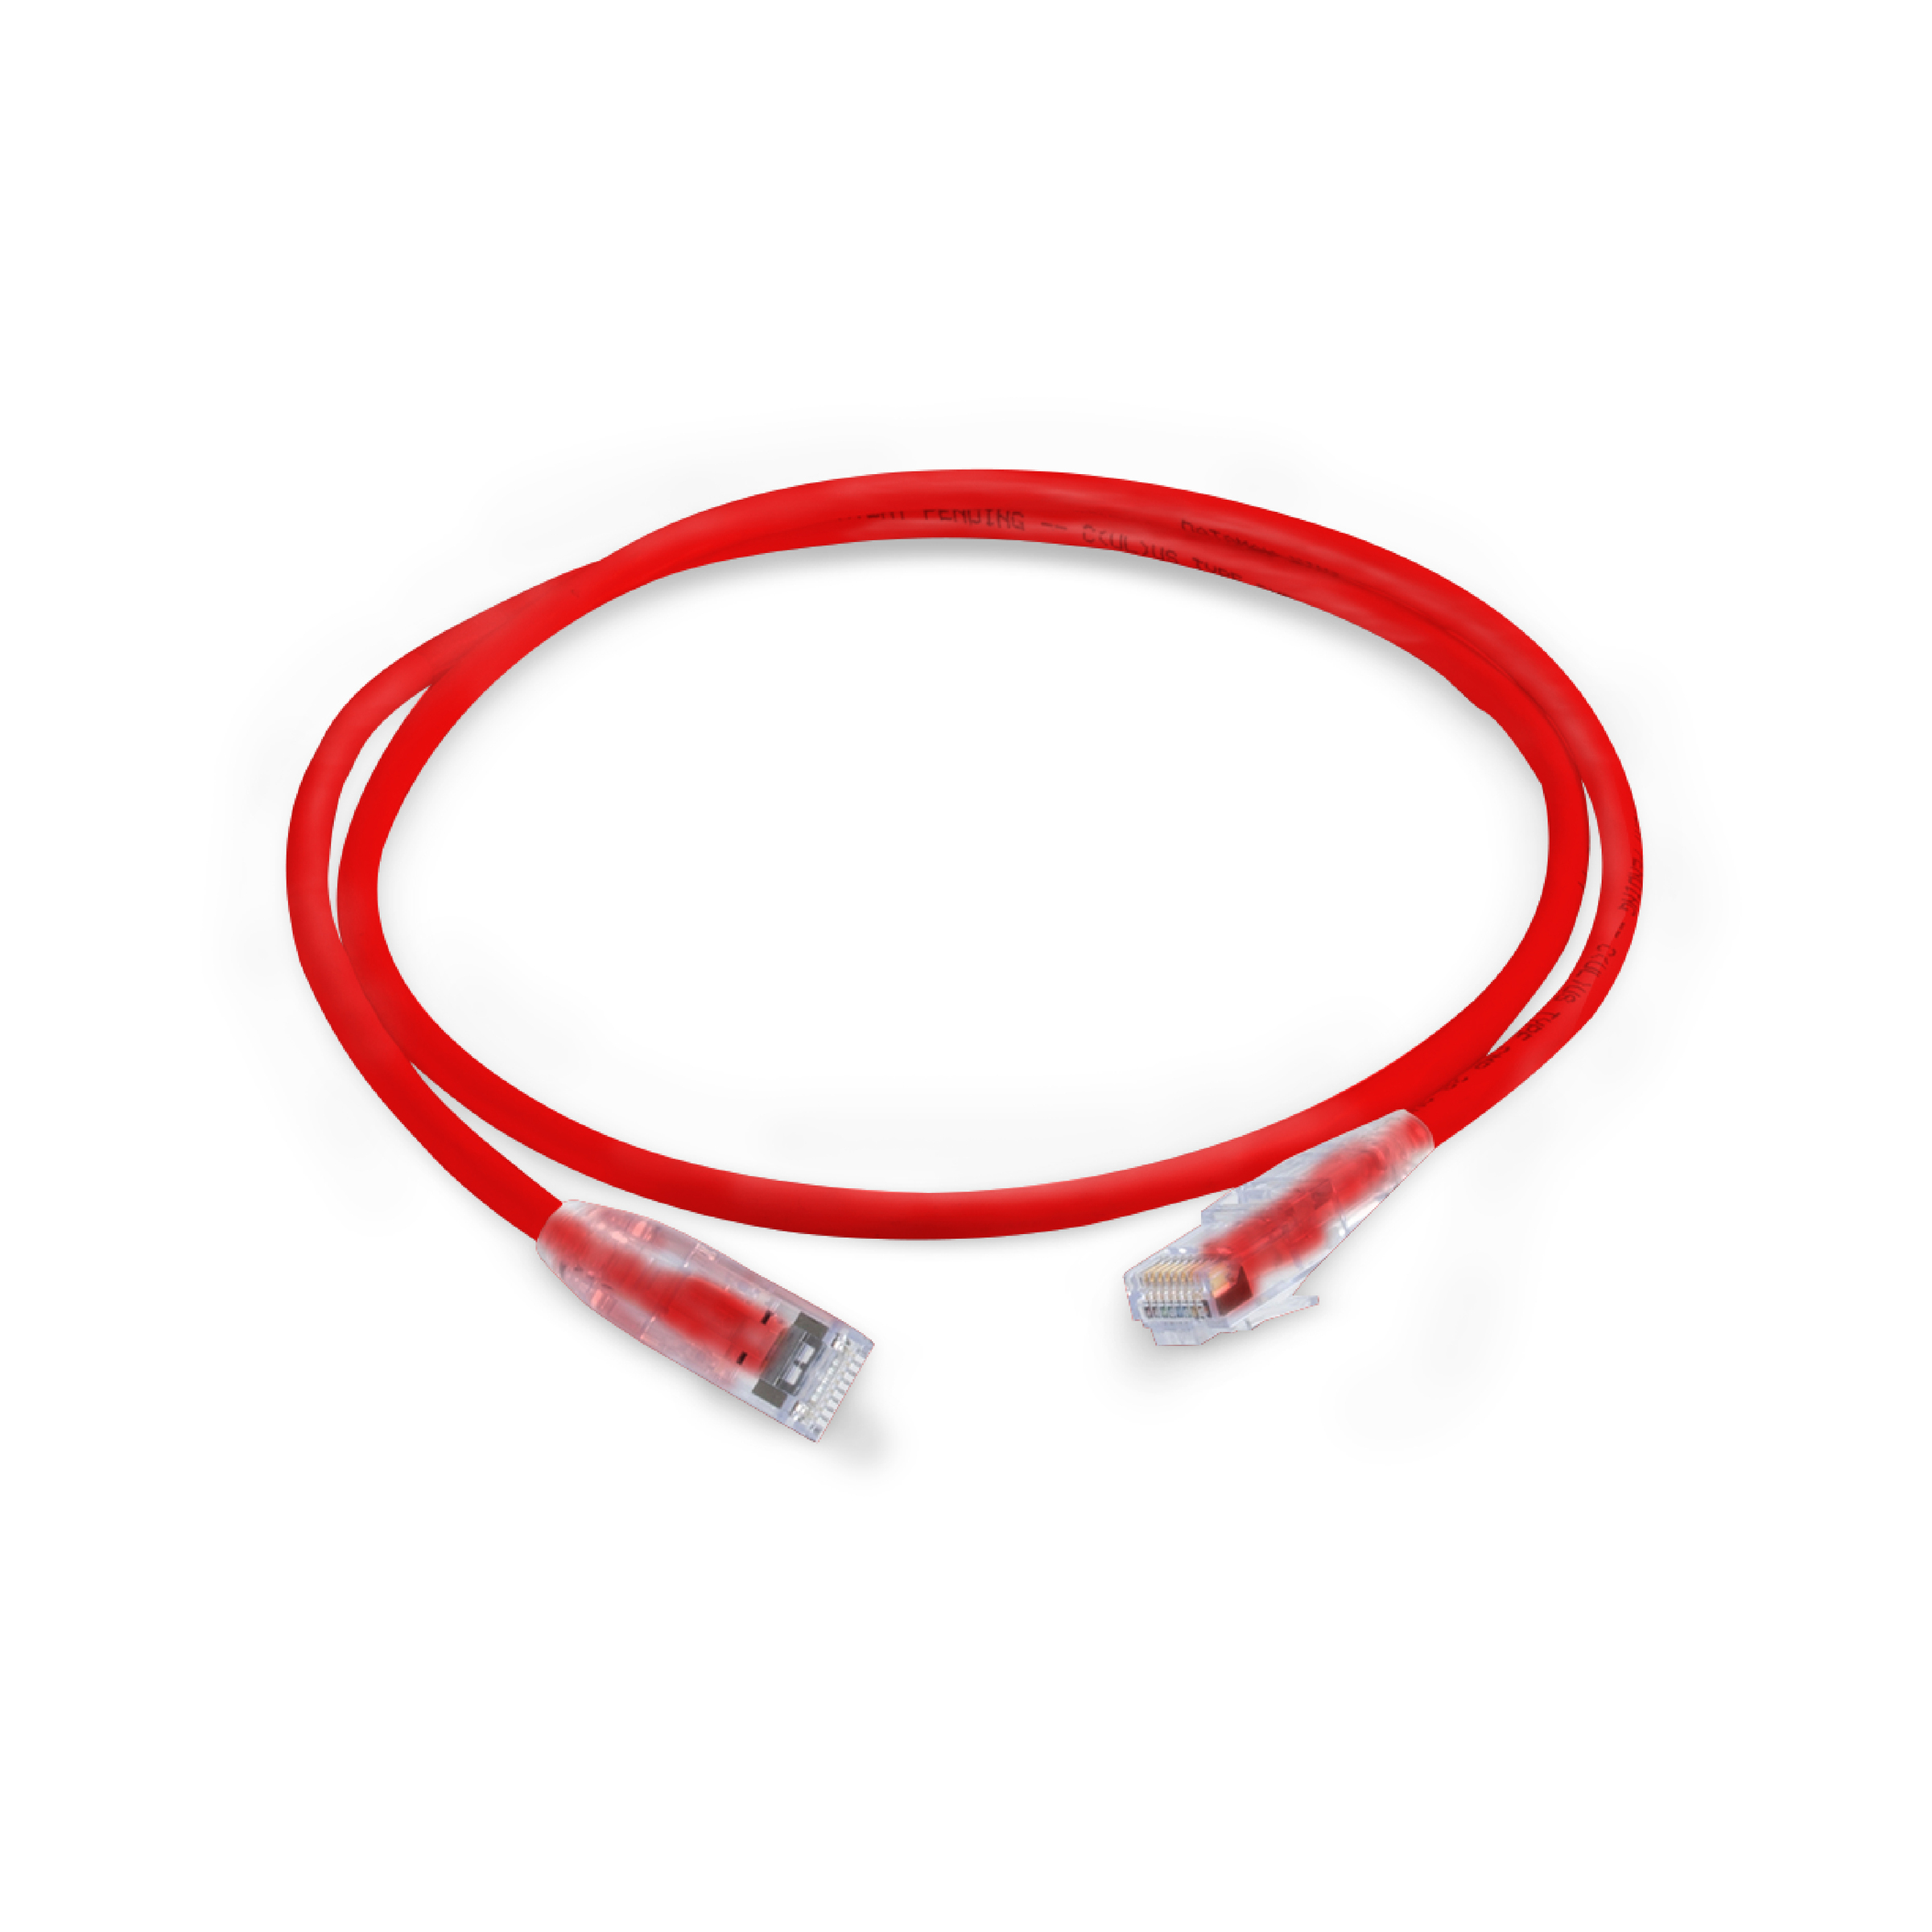 Structured Cabling Solution_Cable Boots_Patchcord Cable_Red.jpg